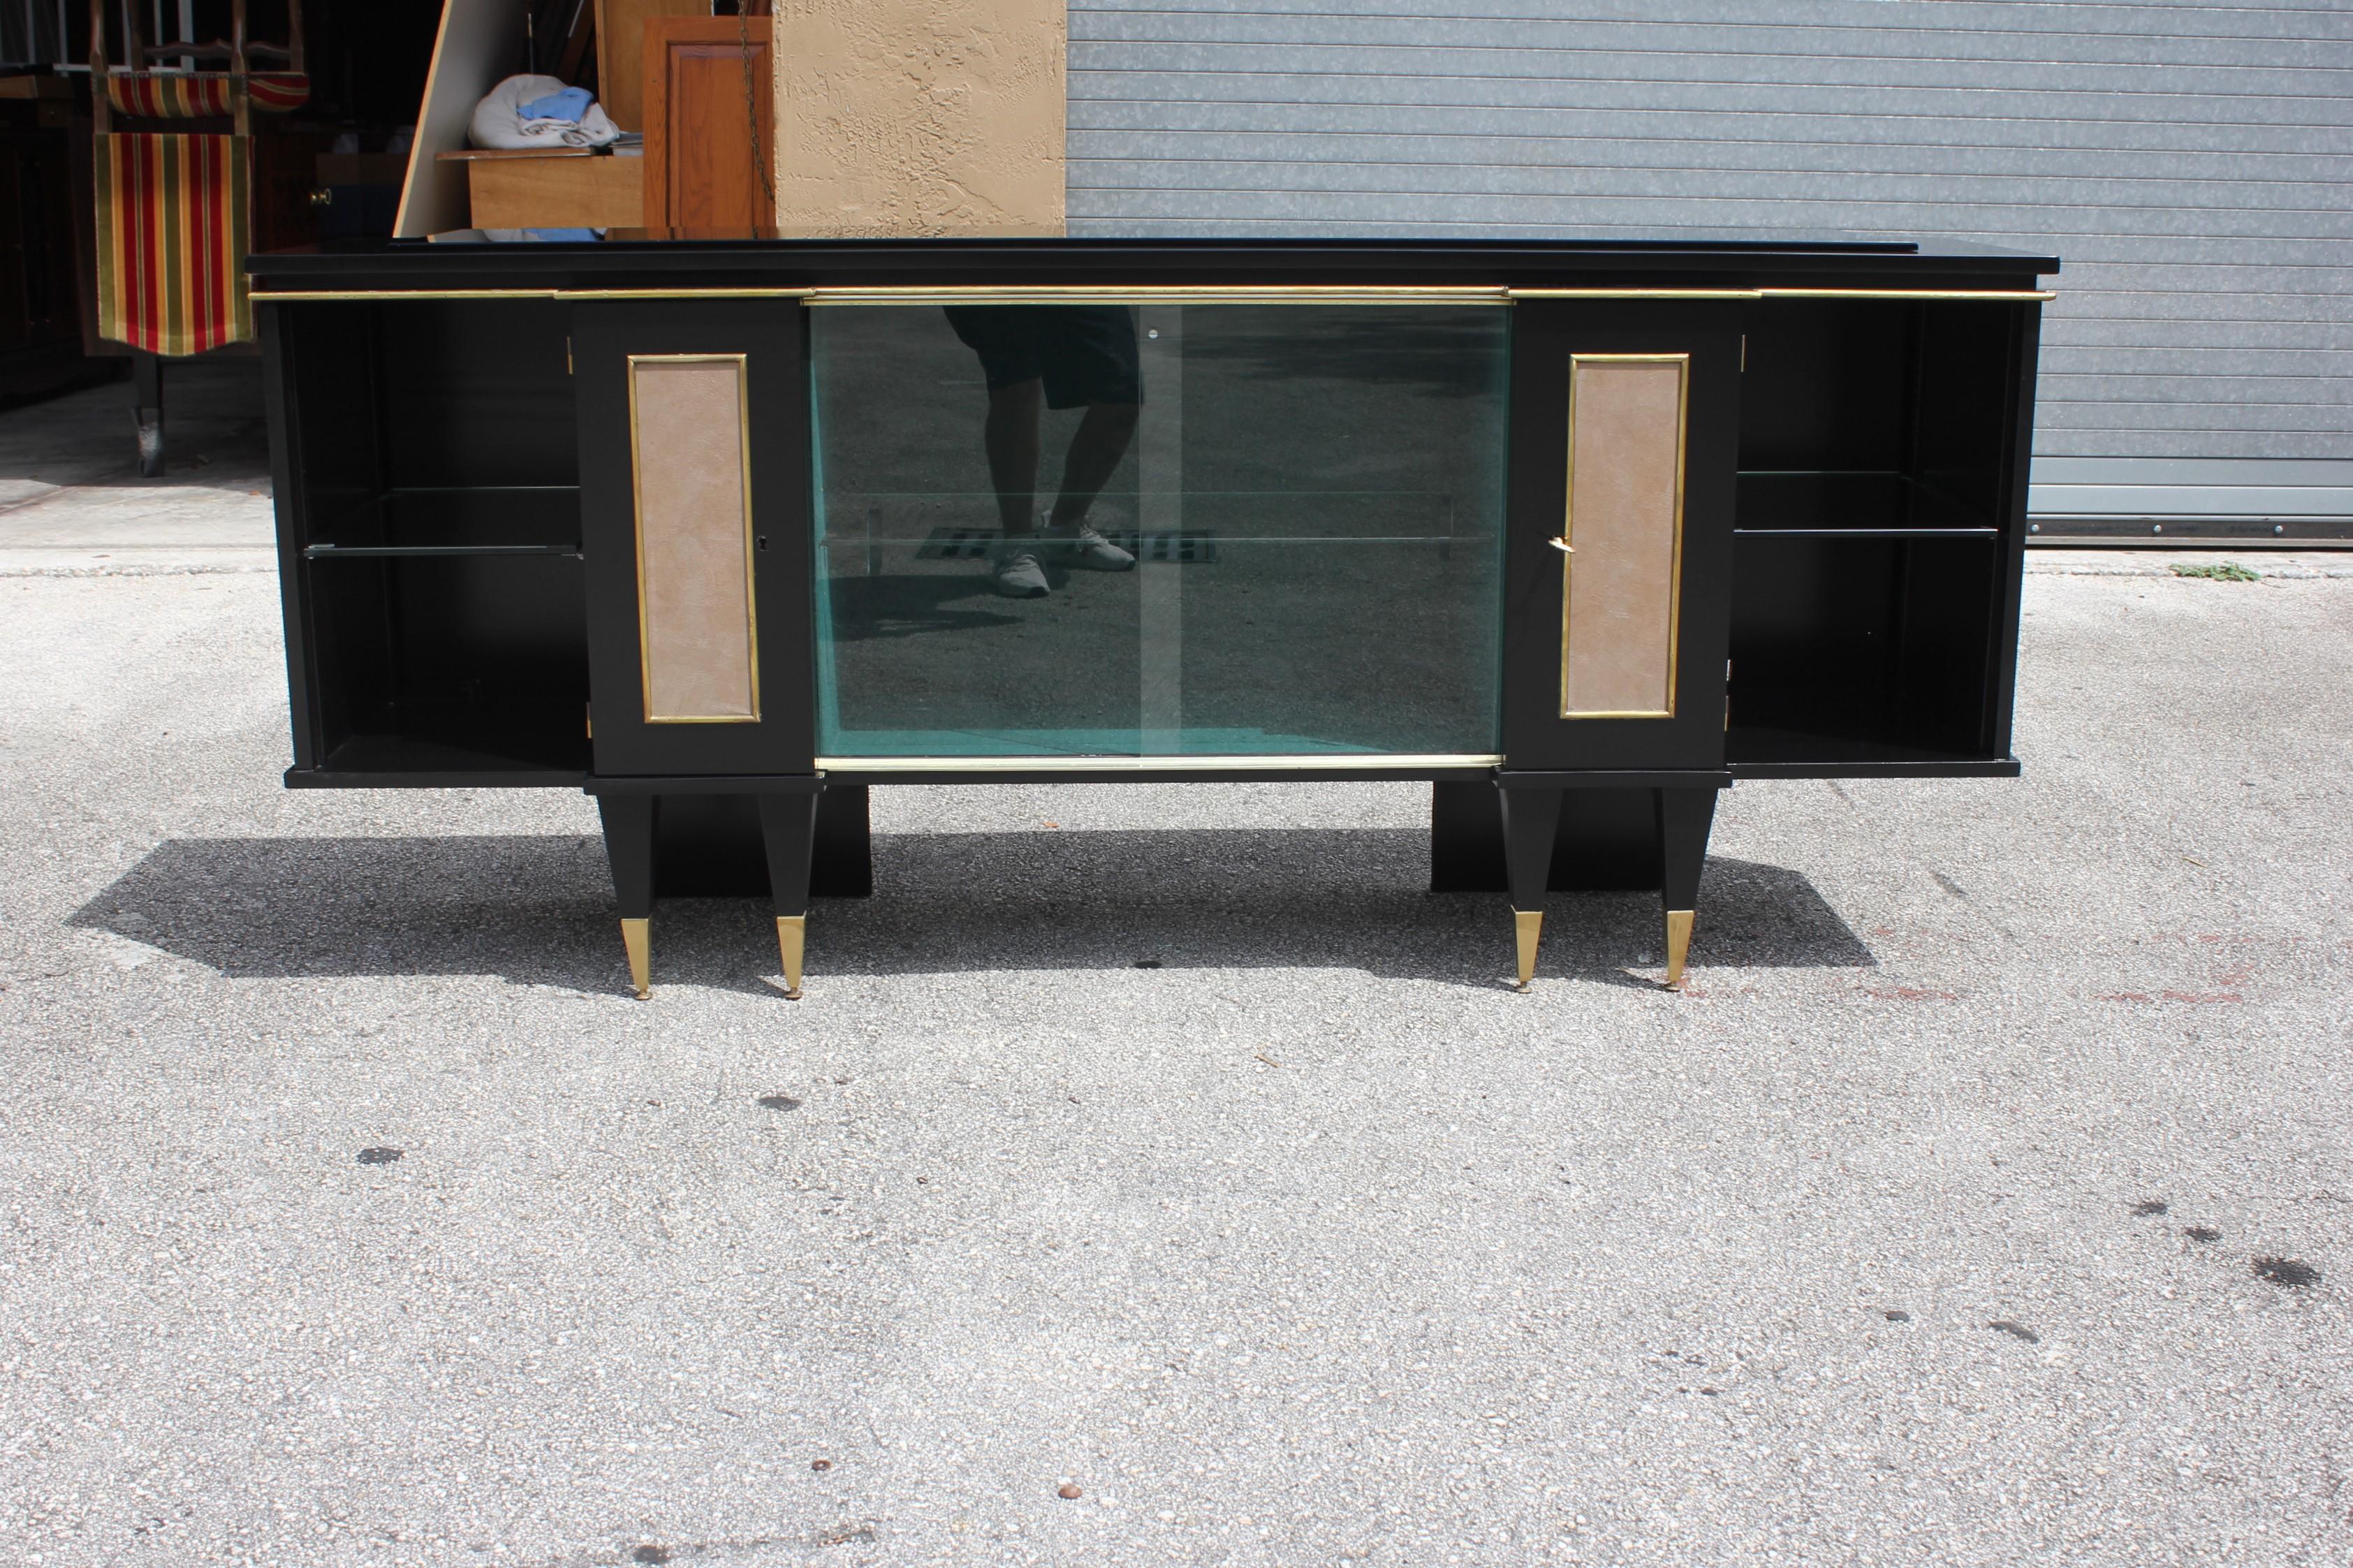 Classic French sideboard or bar or buffet made of mahogany with a black glass top , the mahogany wood has been ebonized and finished with a French polished high luster. The sideboard have two doors with leather face ,and two sliding glass doors with